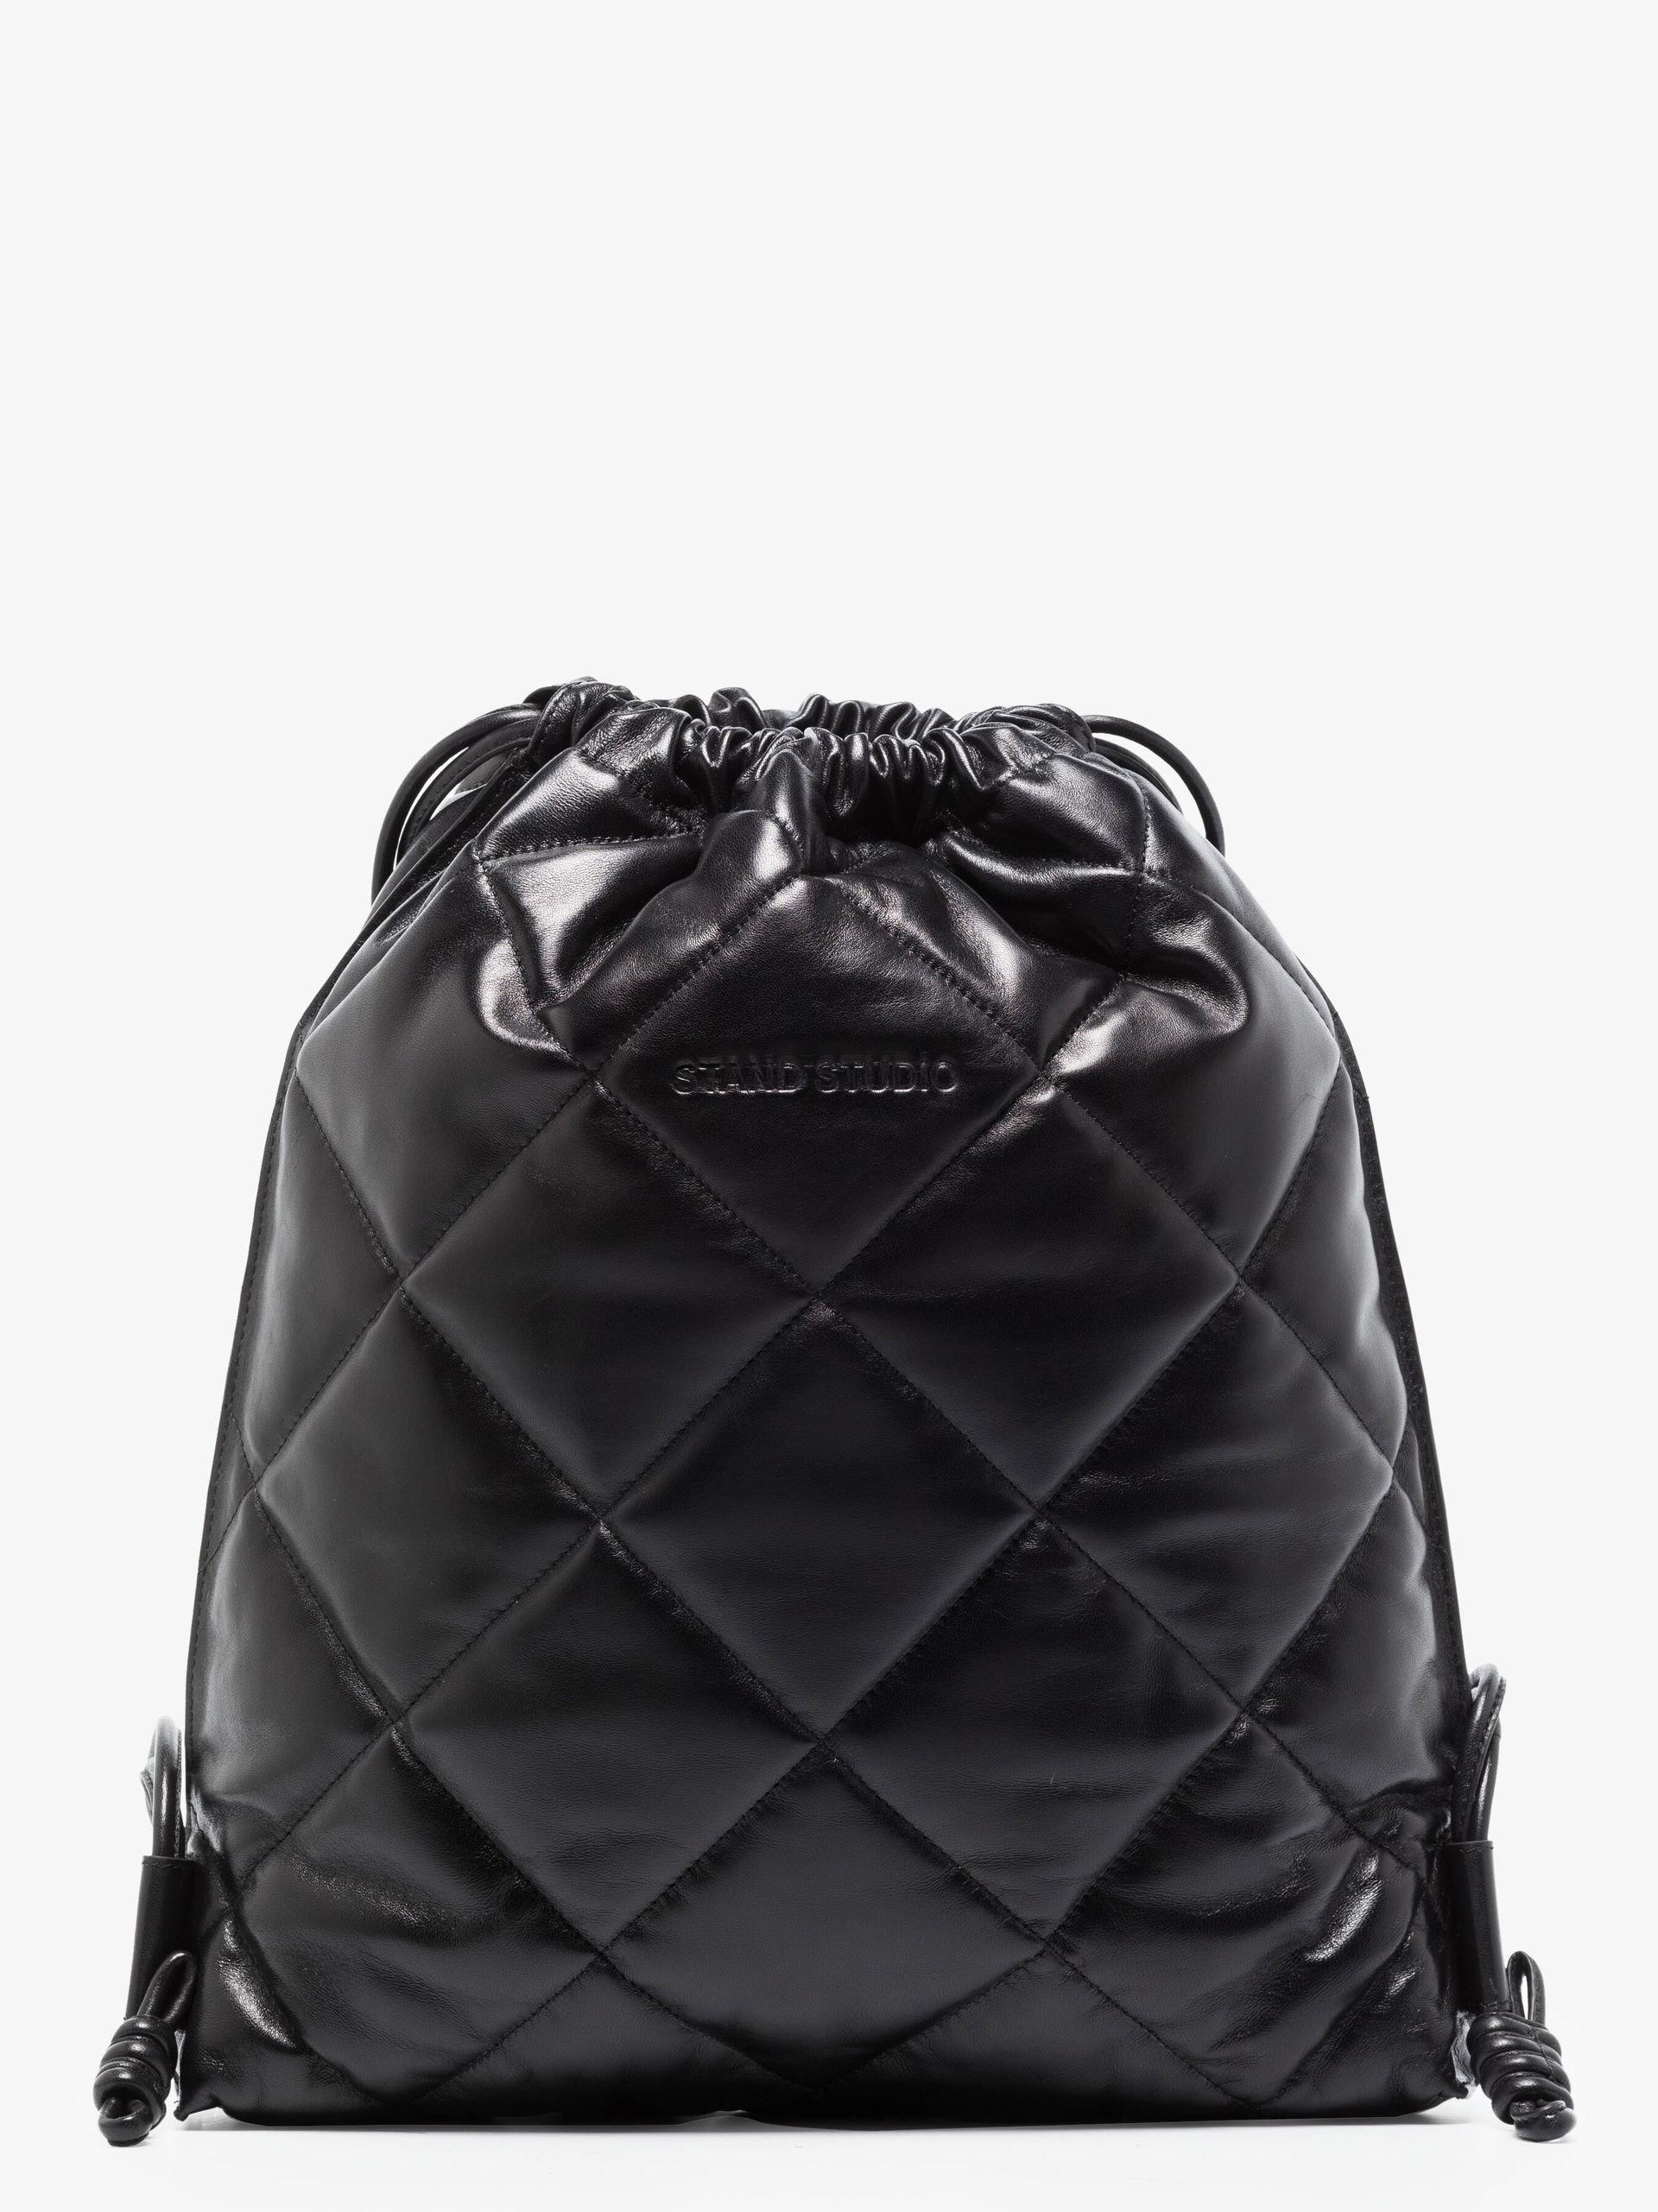 Black Pu Leather Quilted Multifunctional Backpack And Sling Bag For Women,  450g, Size: 18.5 X 10